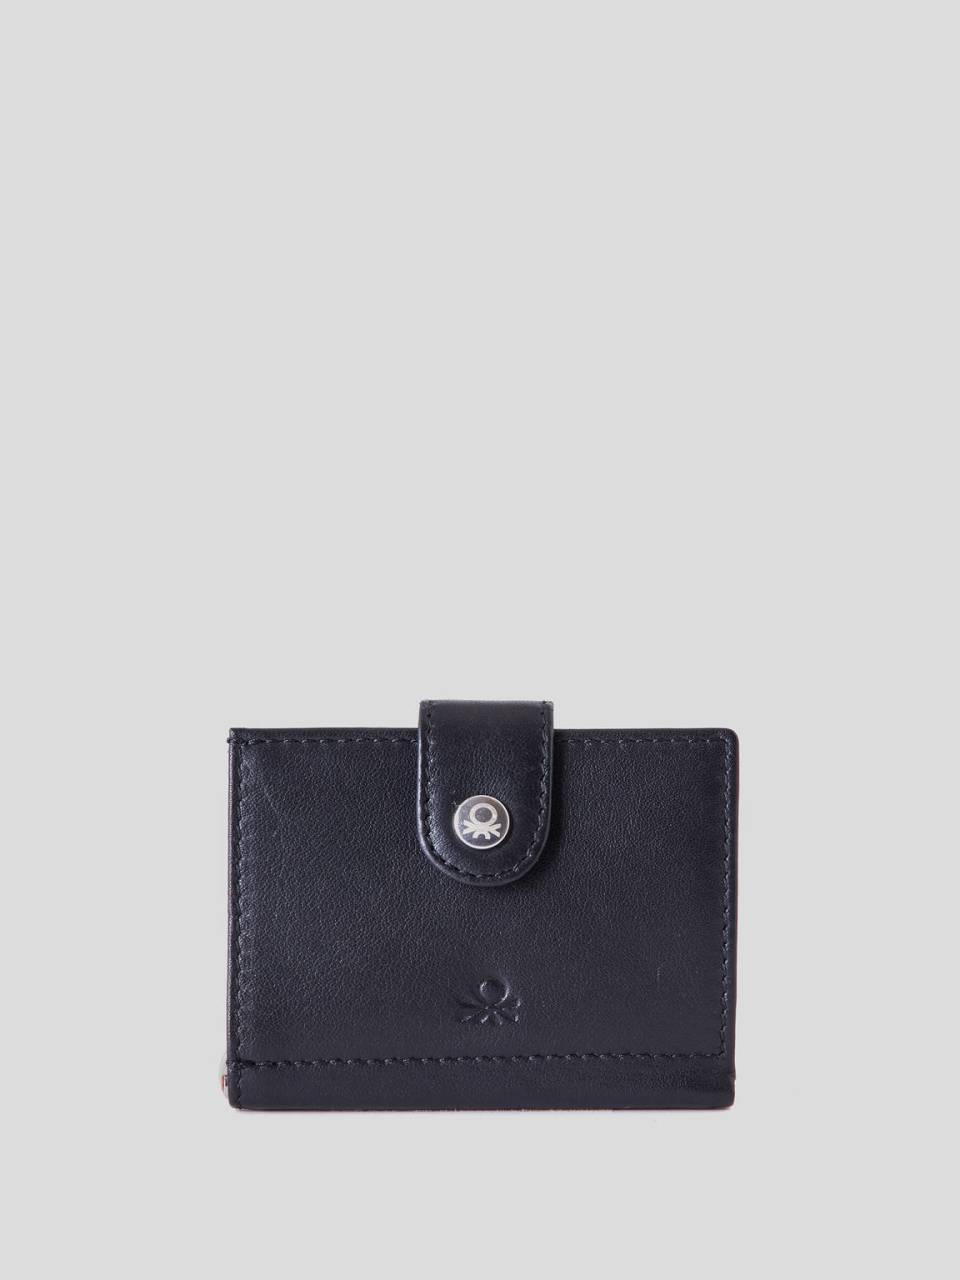 Benetton Compact leather wallet. 1